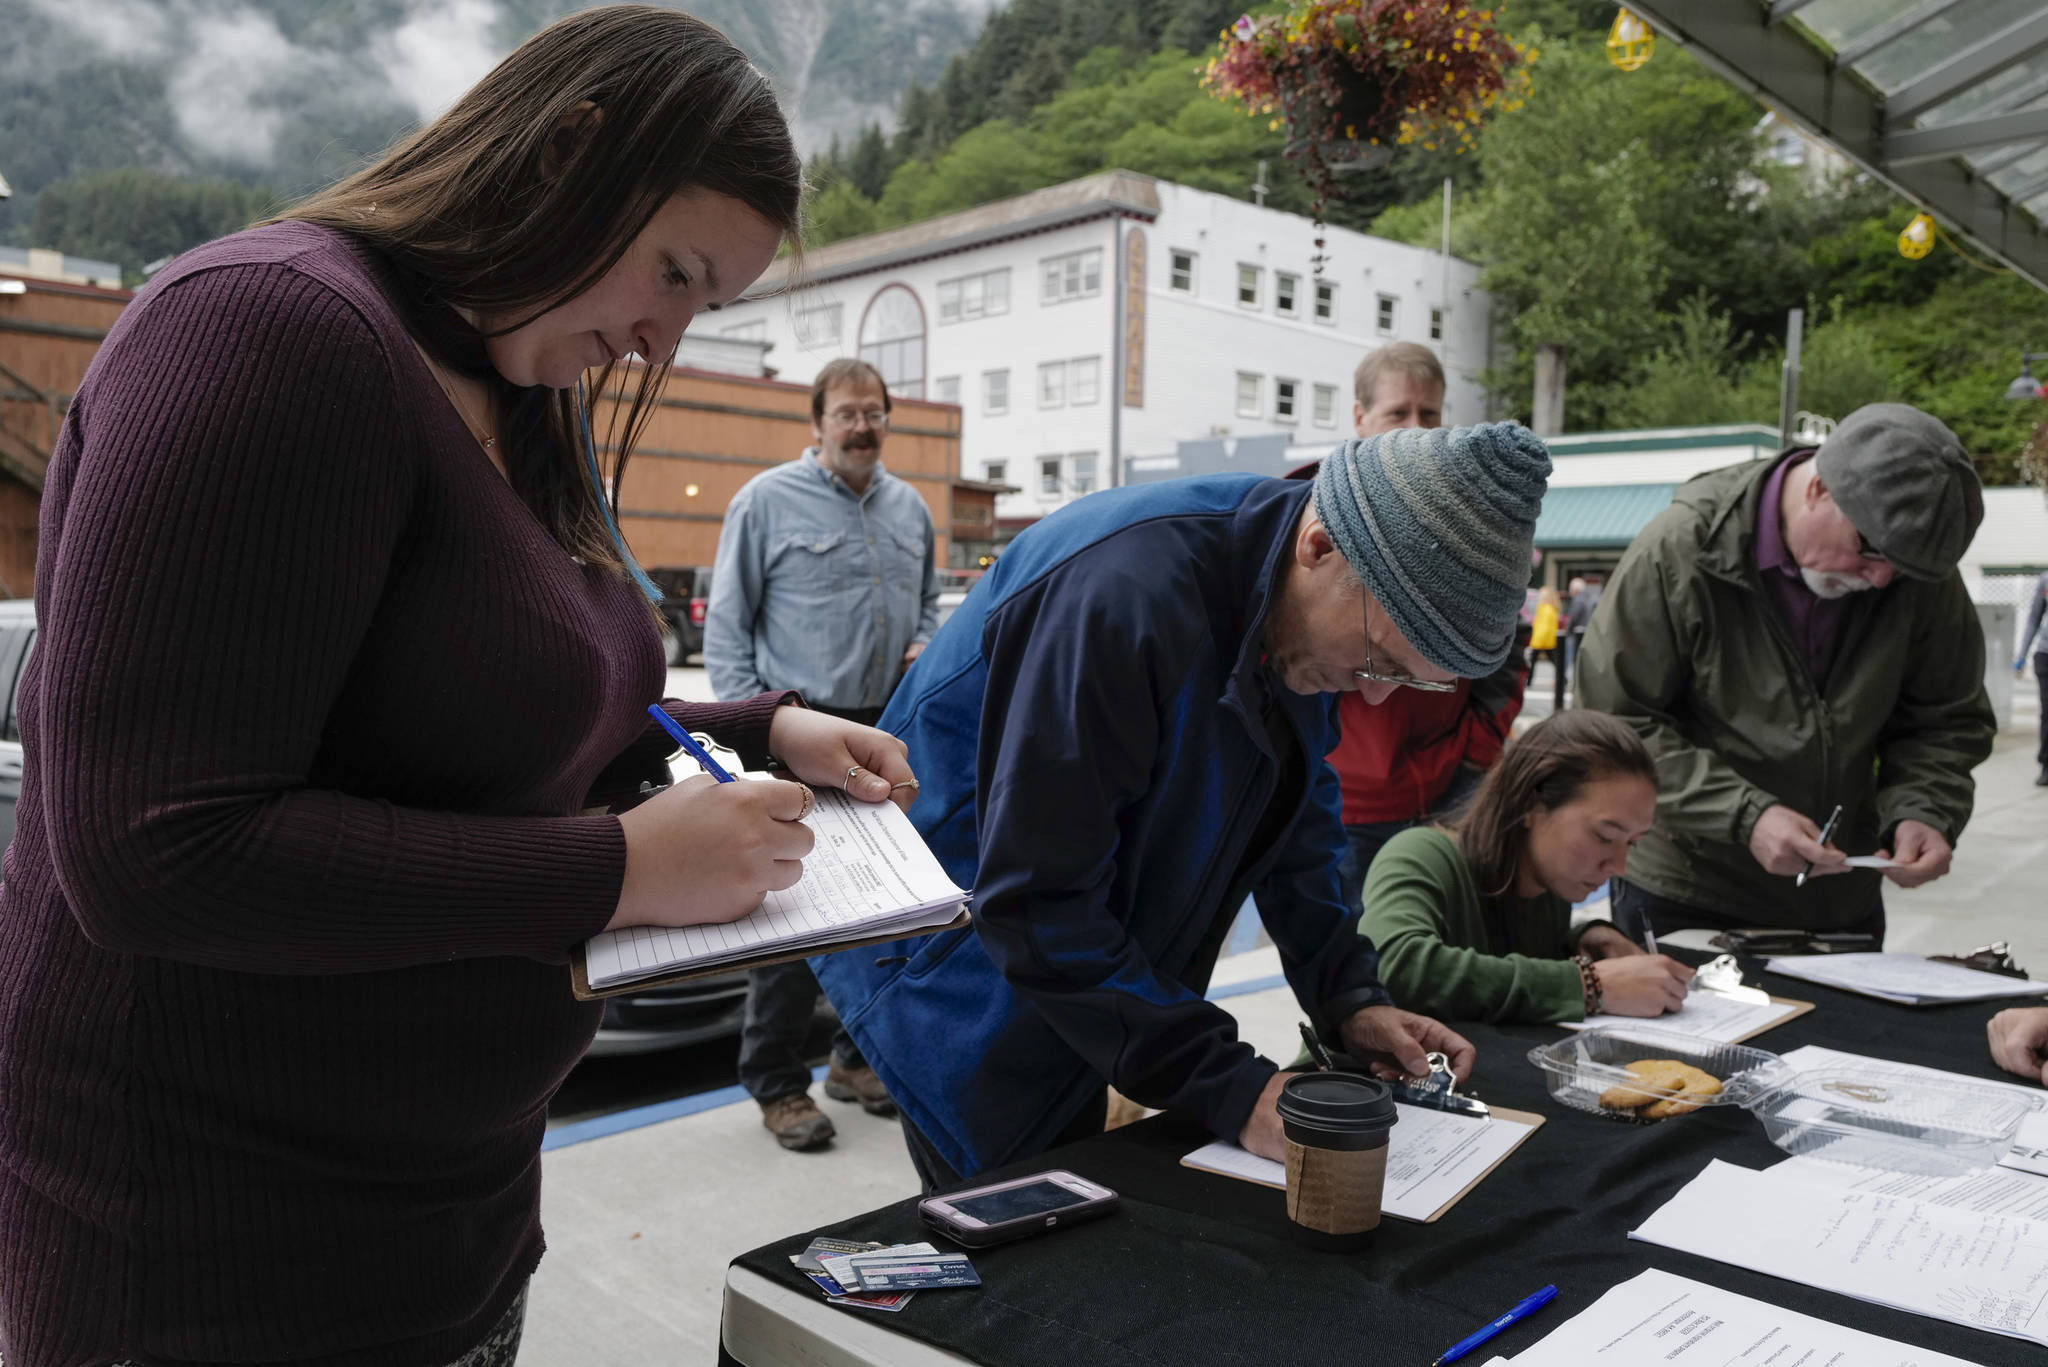 Michael Penn | Juneau Empire                                Monika Kunat (left) signs an application petition to recall Gov. Mike Dunleavy on Thursday with others at the Planet Alaska Gallery in Juneau.